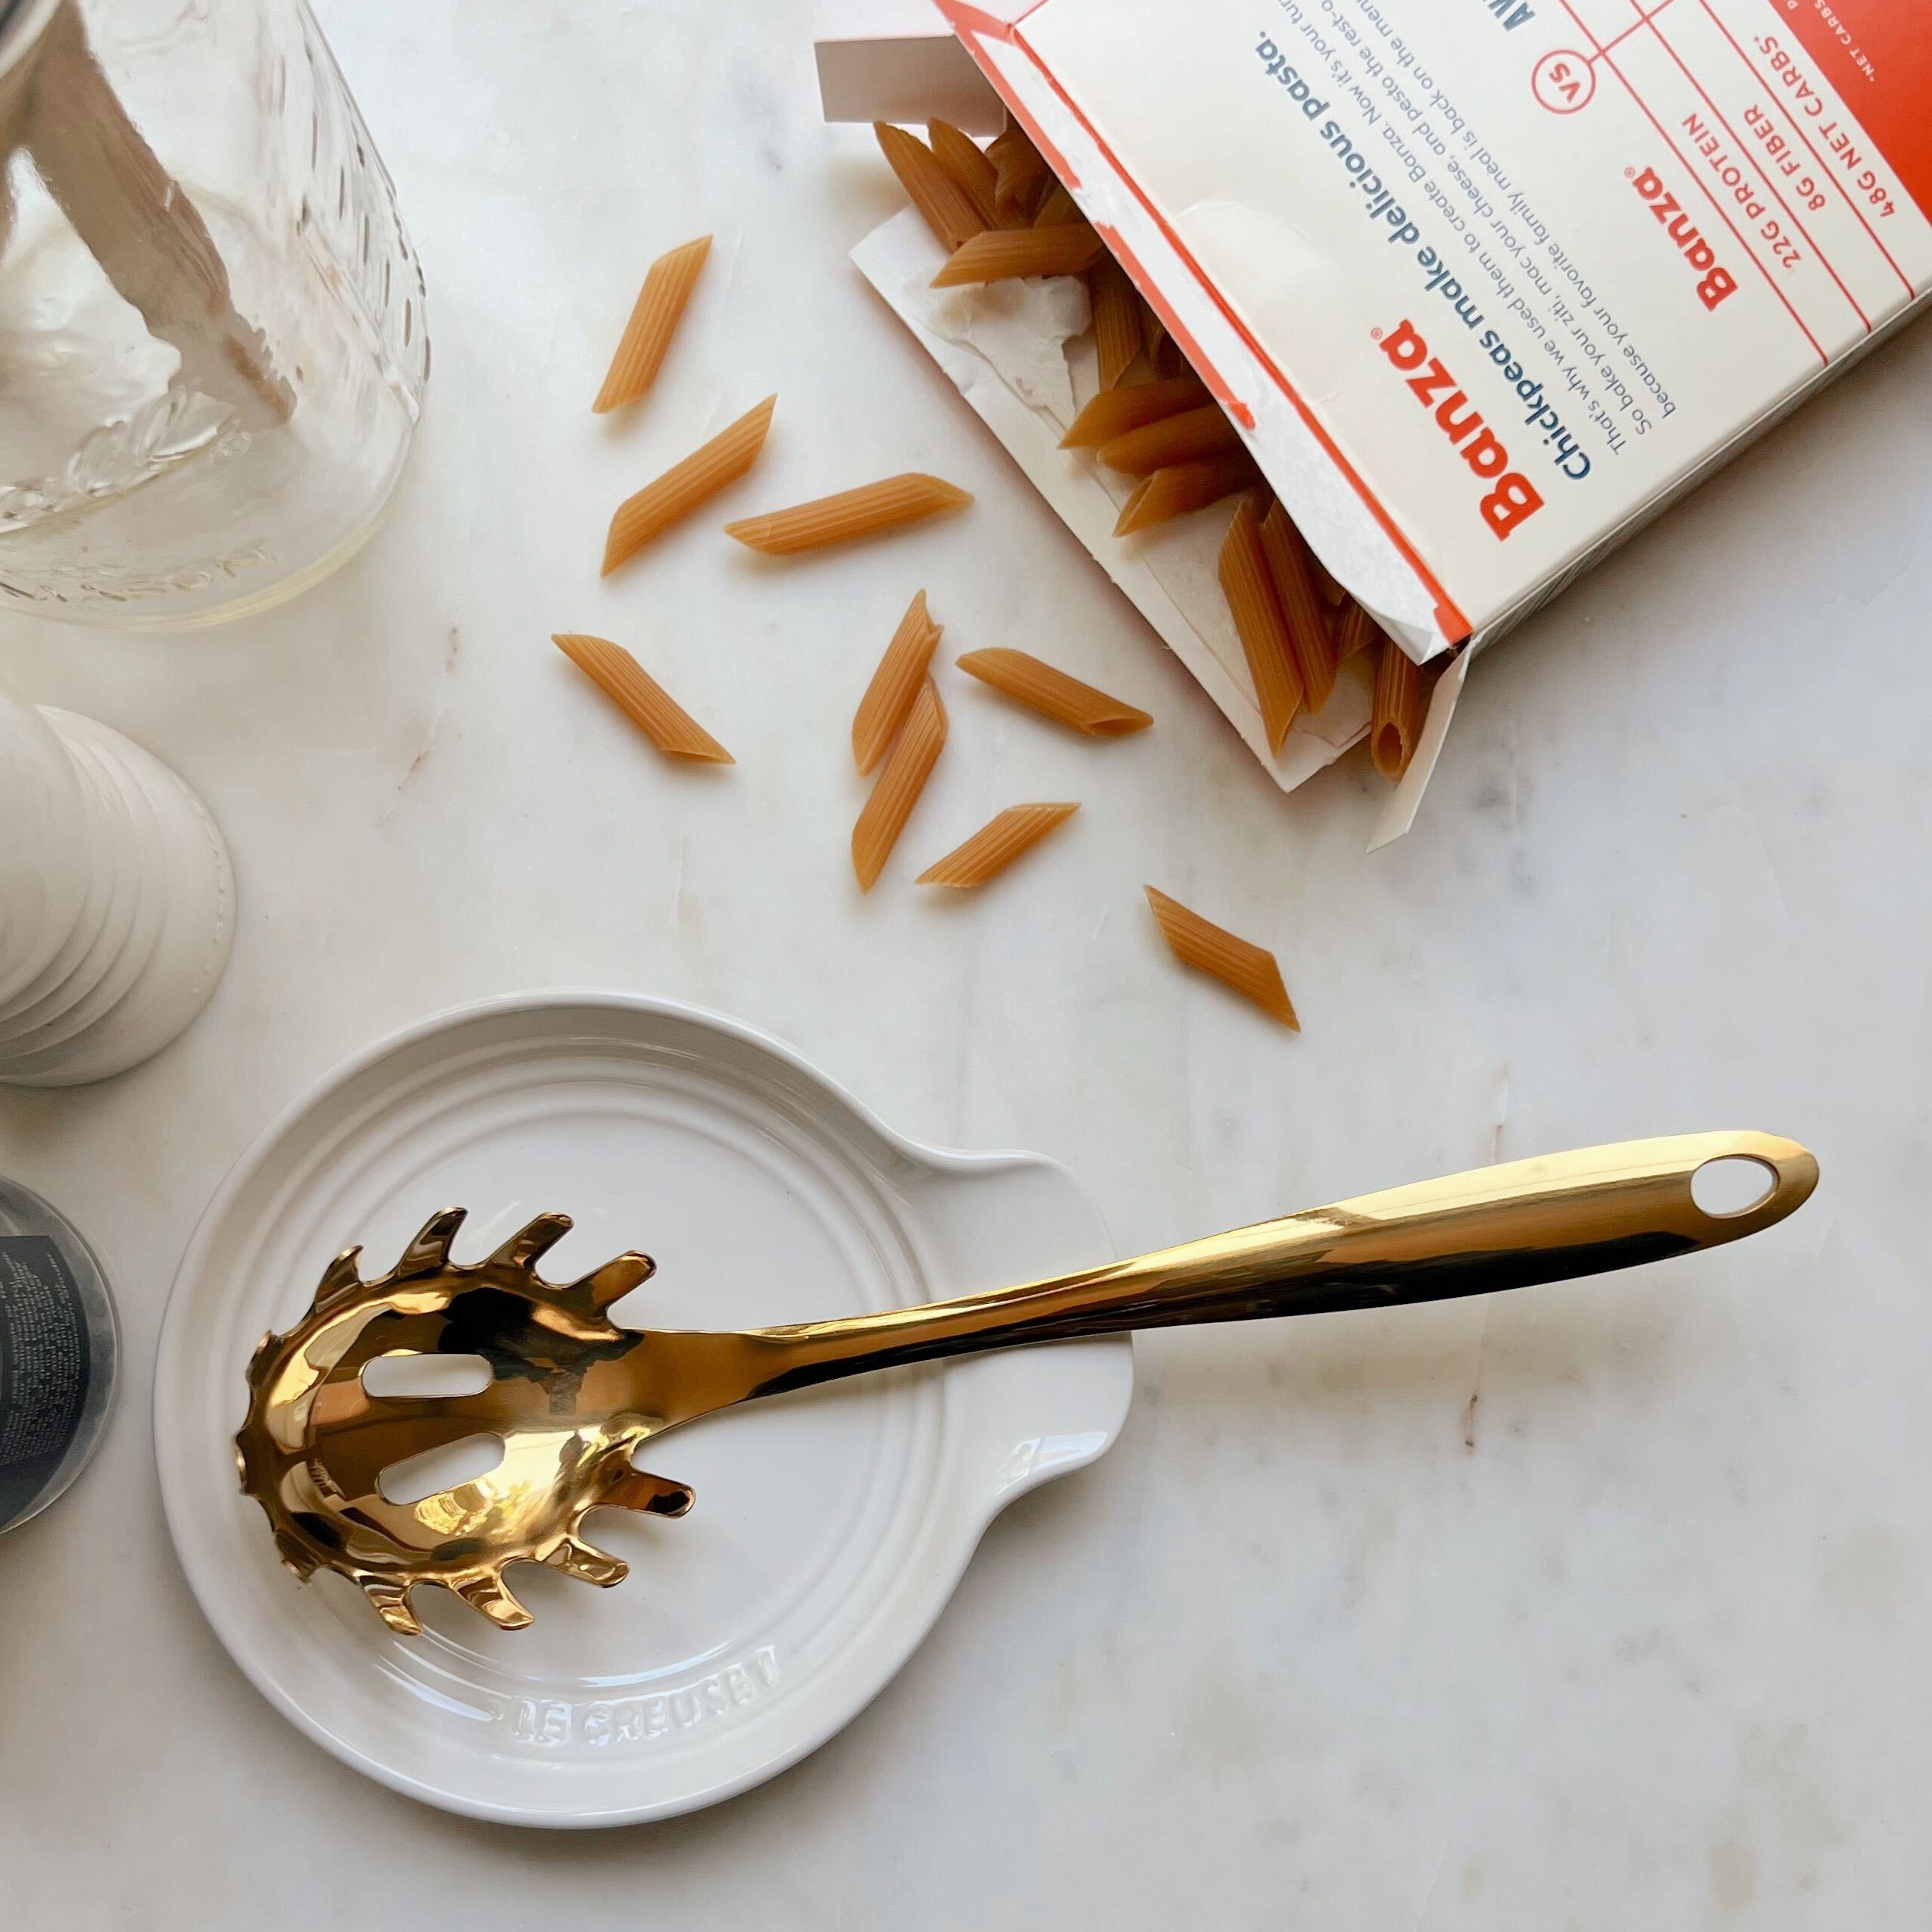 A gold pasta spoon laying on a white ceramic Le Creuset spoon rest next to Banza pasta noodles spilling out of their package on a white marble counter.